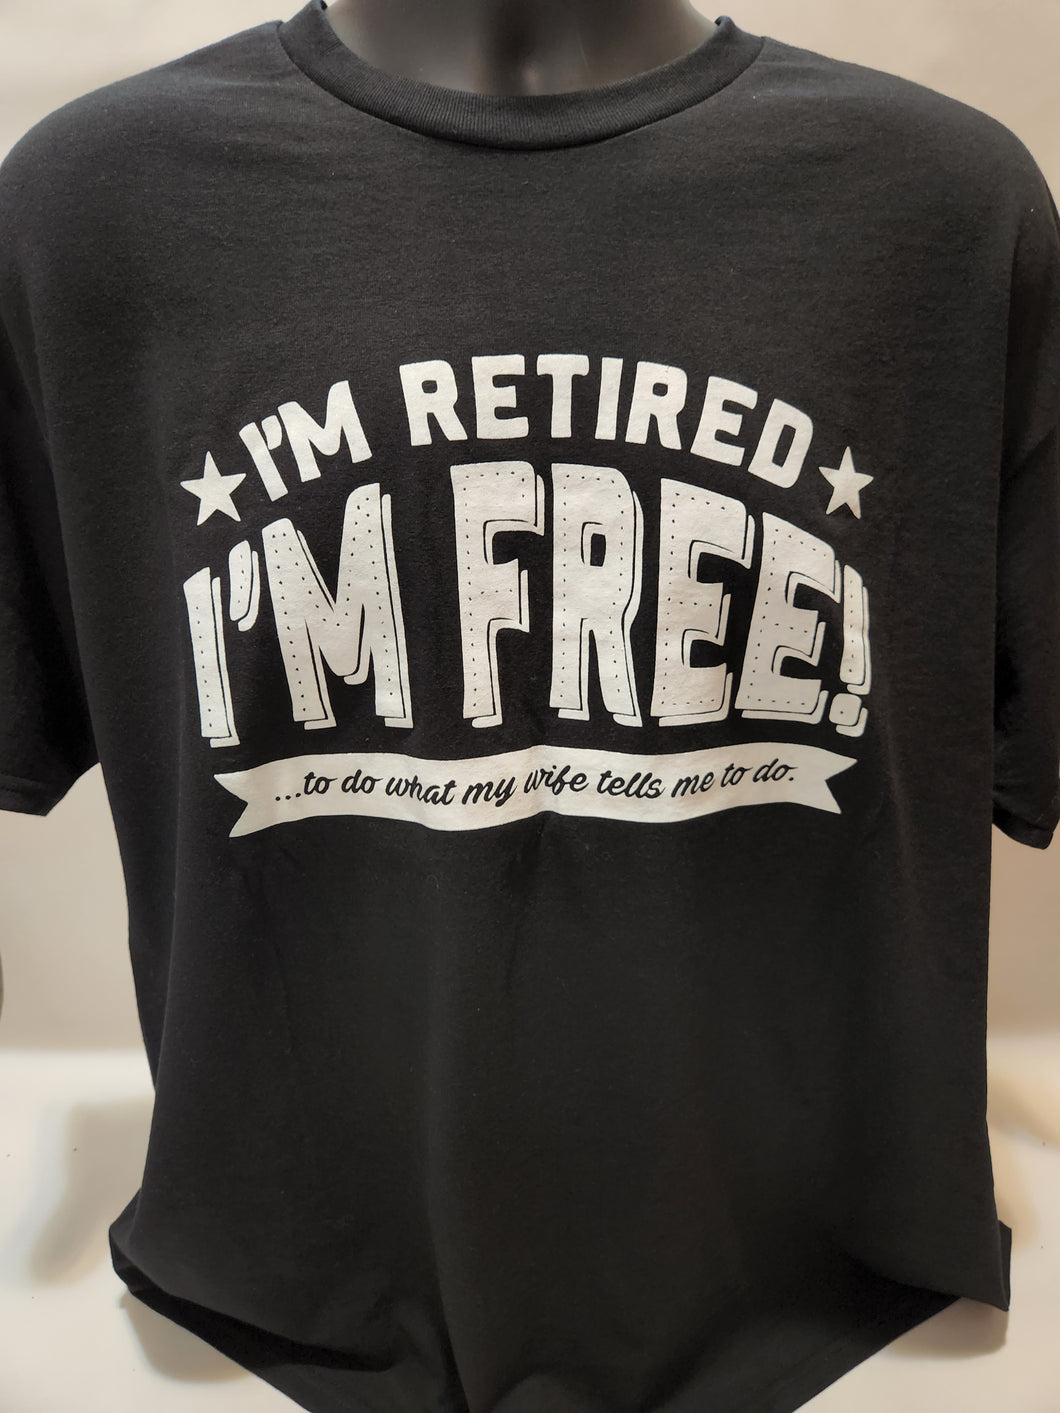 FREE I'M RETIRED TO WORK FOR MY WIFE